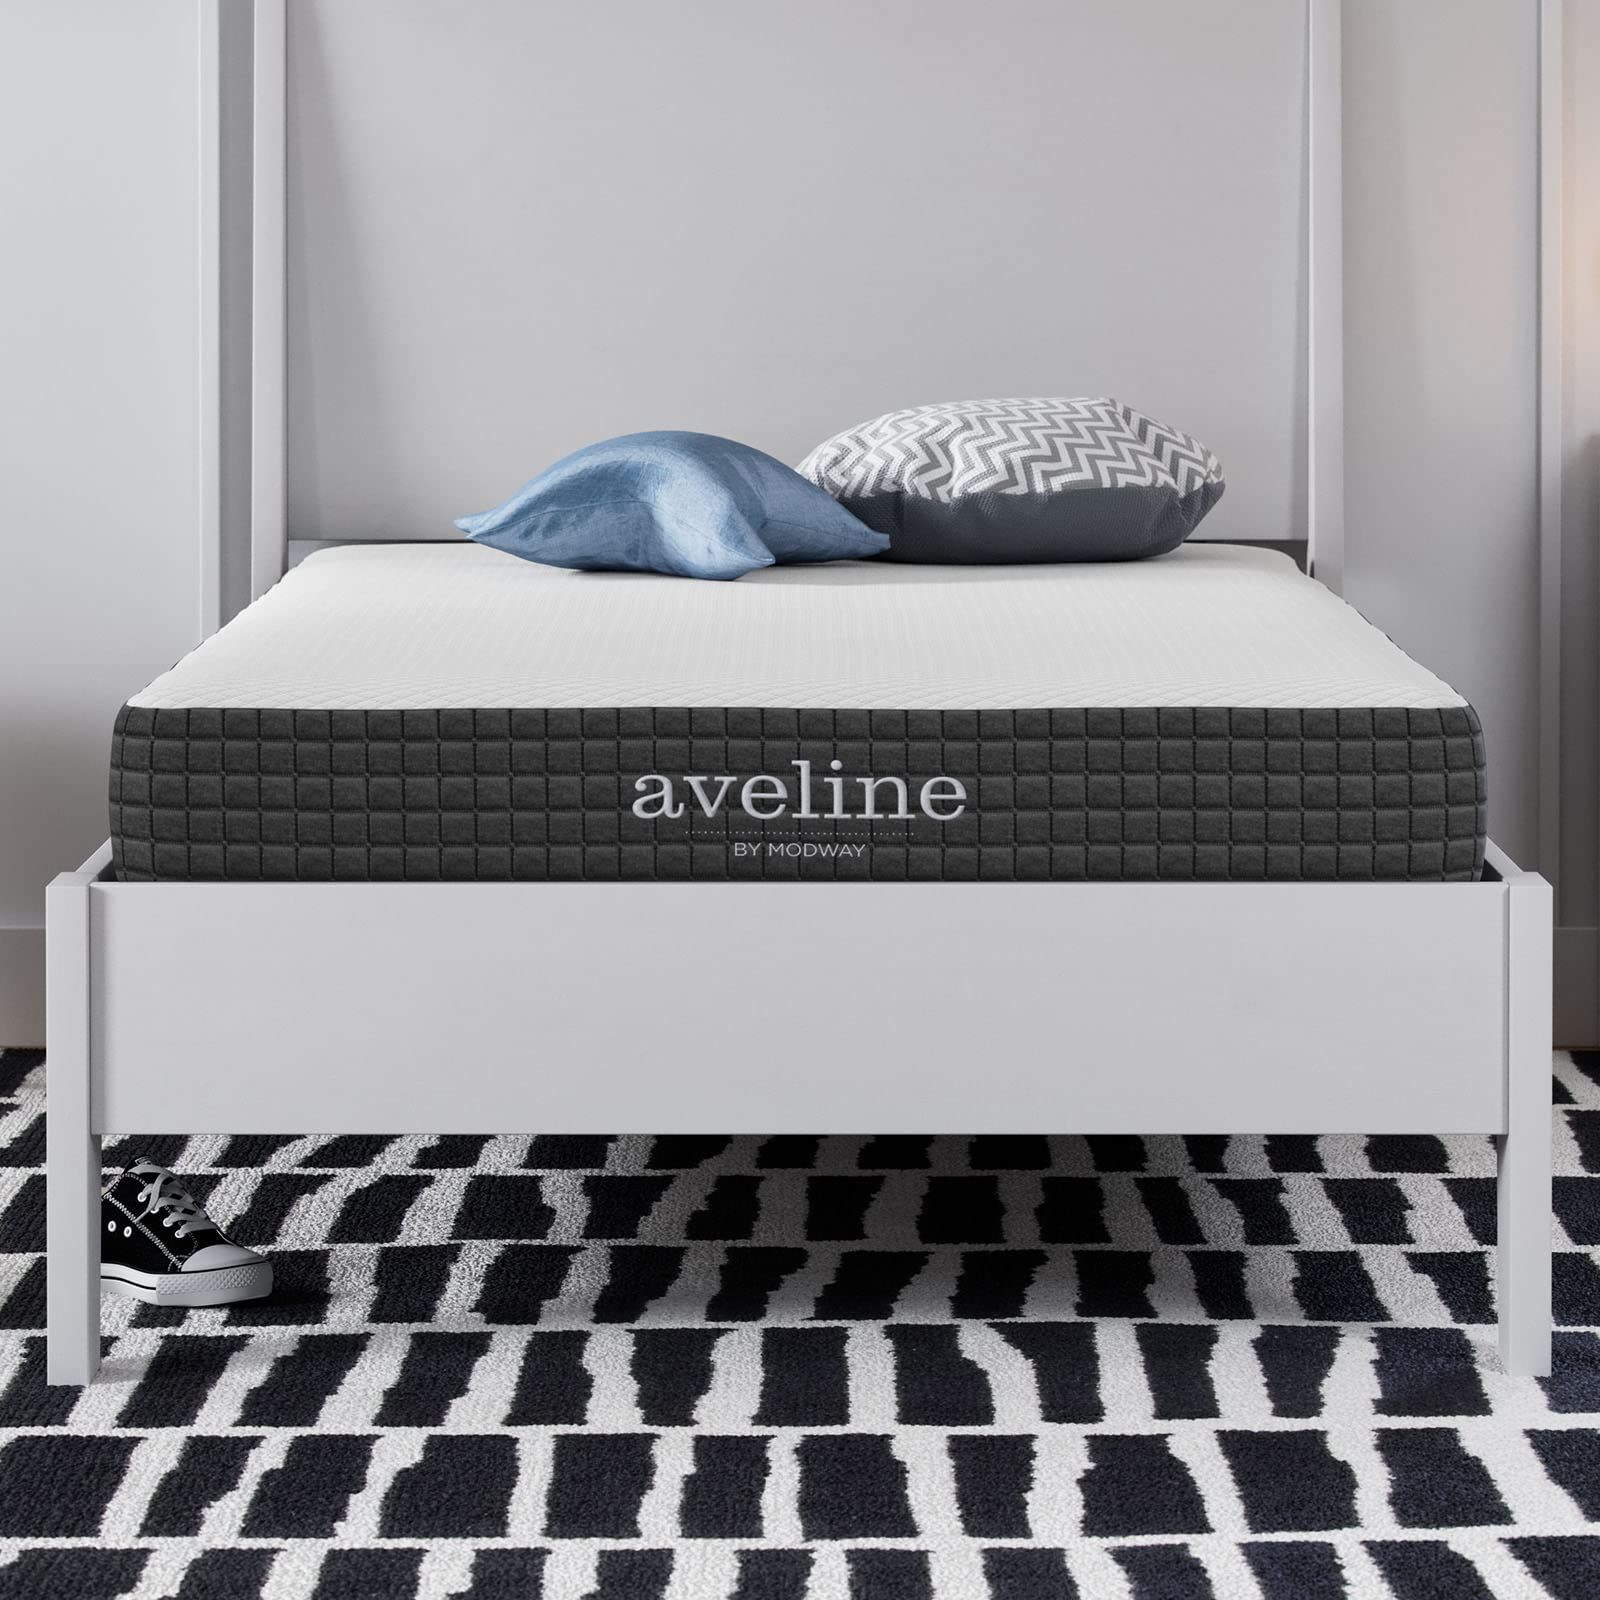 Book Cover Modway Aveline Gel Infused Memory Mattress with CertiPUR-US Certified Foam, Twin, White Twin 6 inch